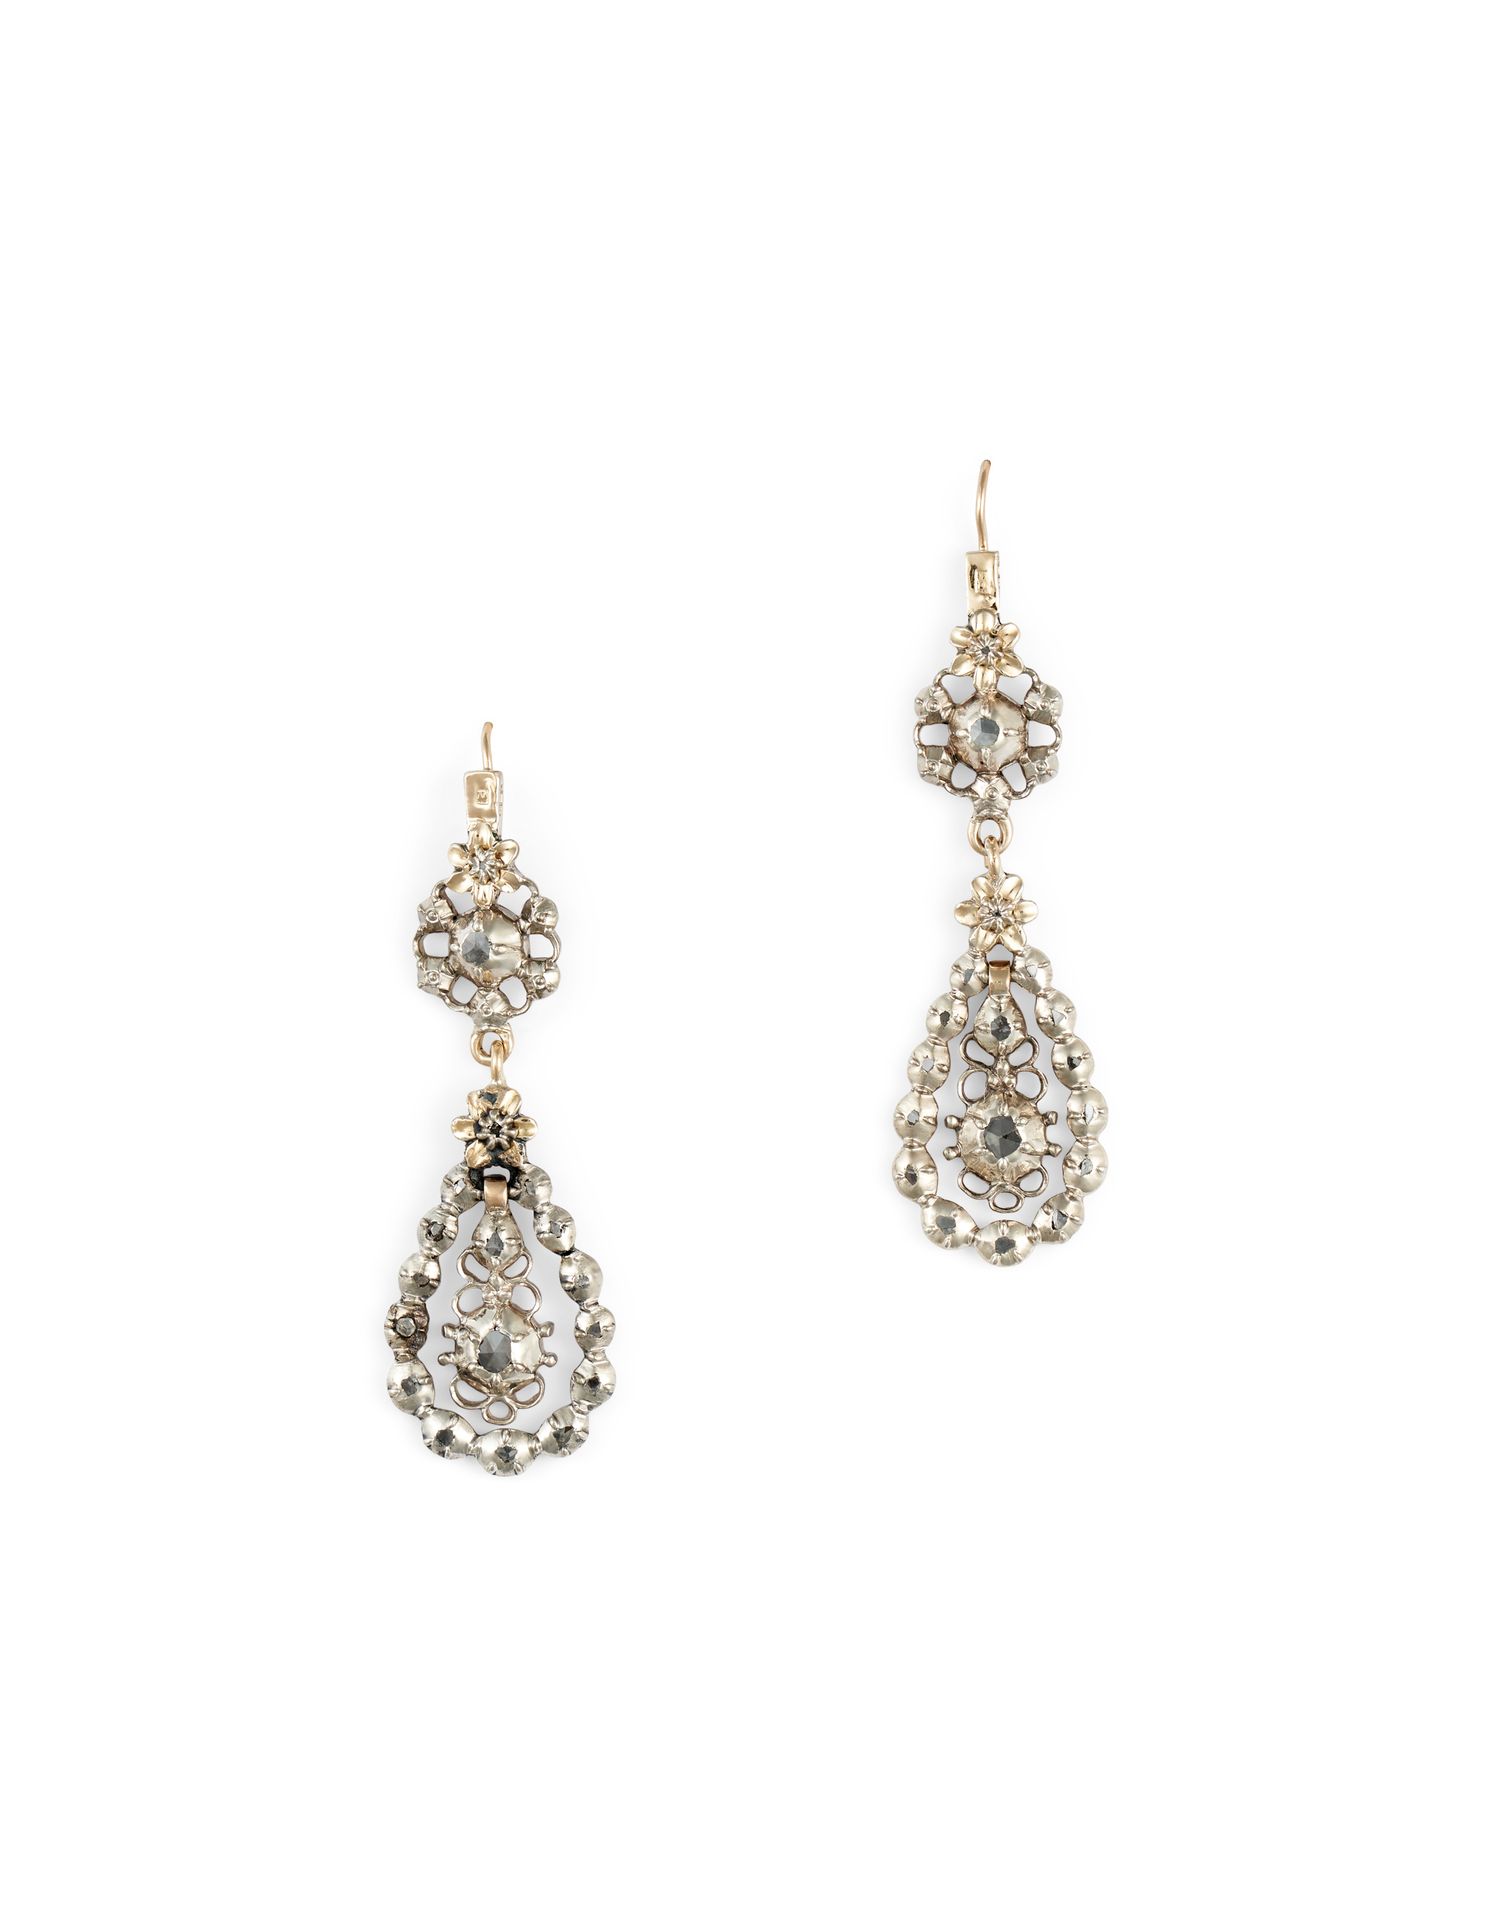 Null FLEMISH EARRINGS In 18K yellow gold and silver, set with rose cut diamonds.&hellip;